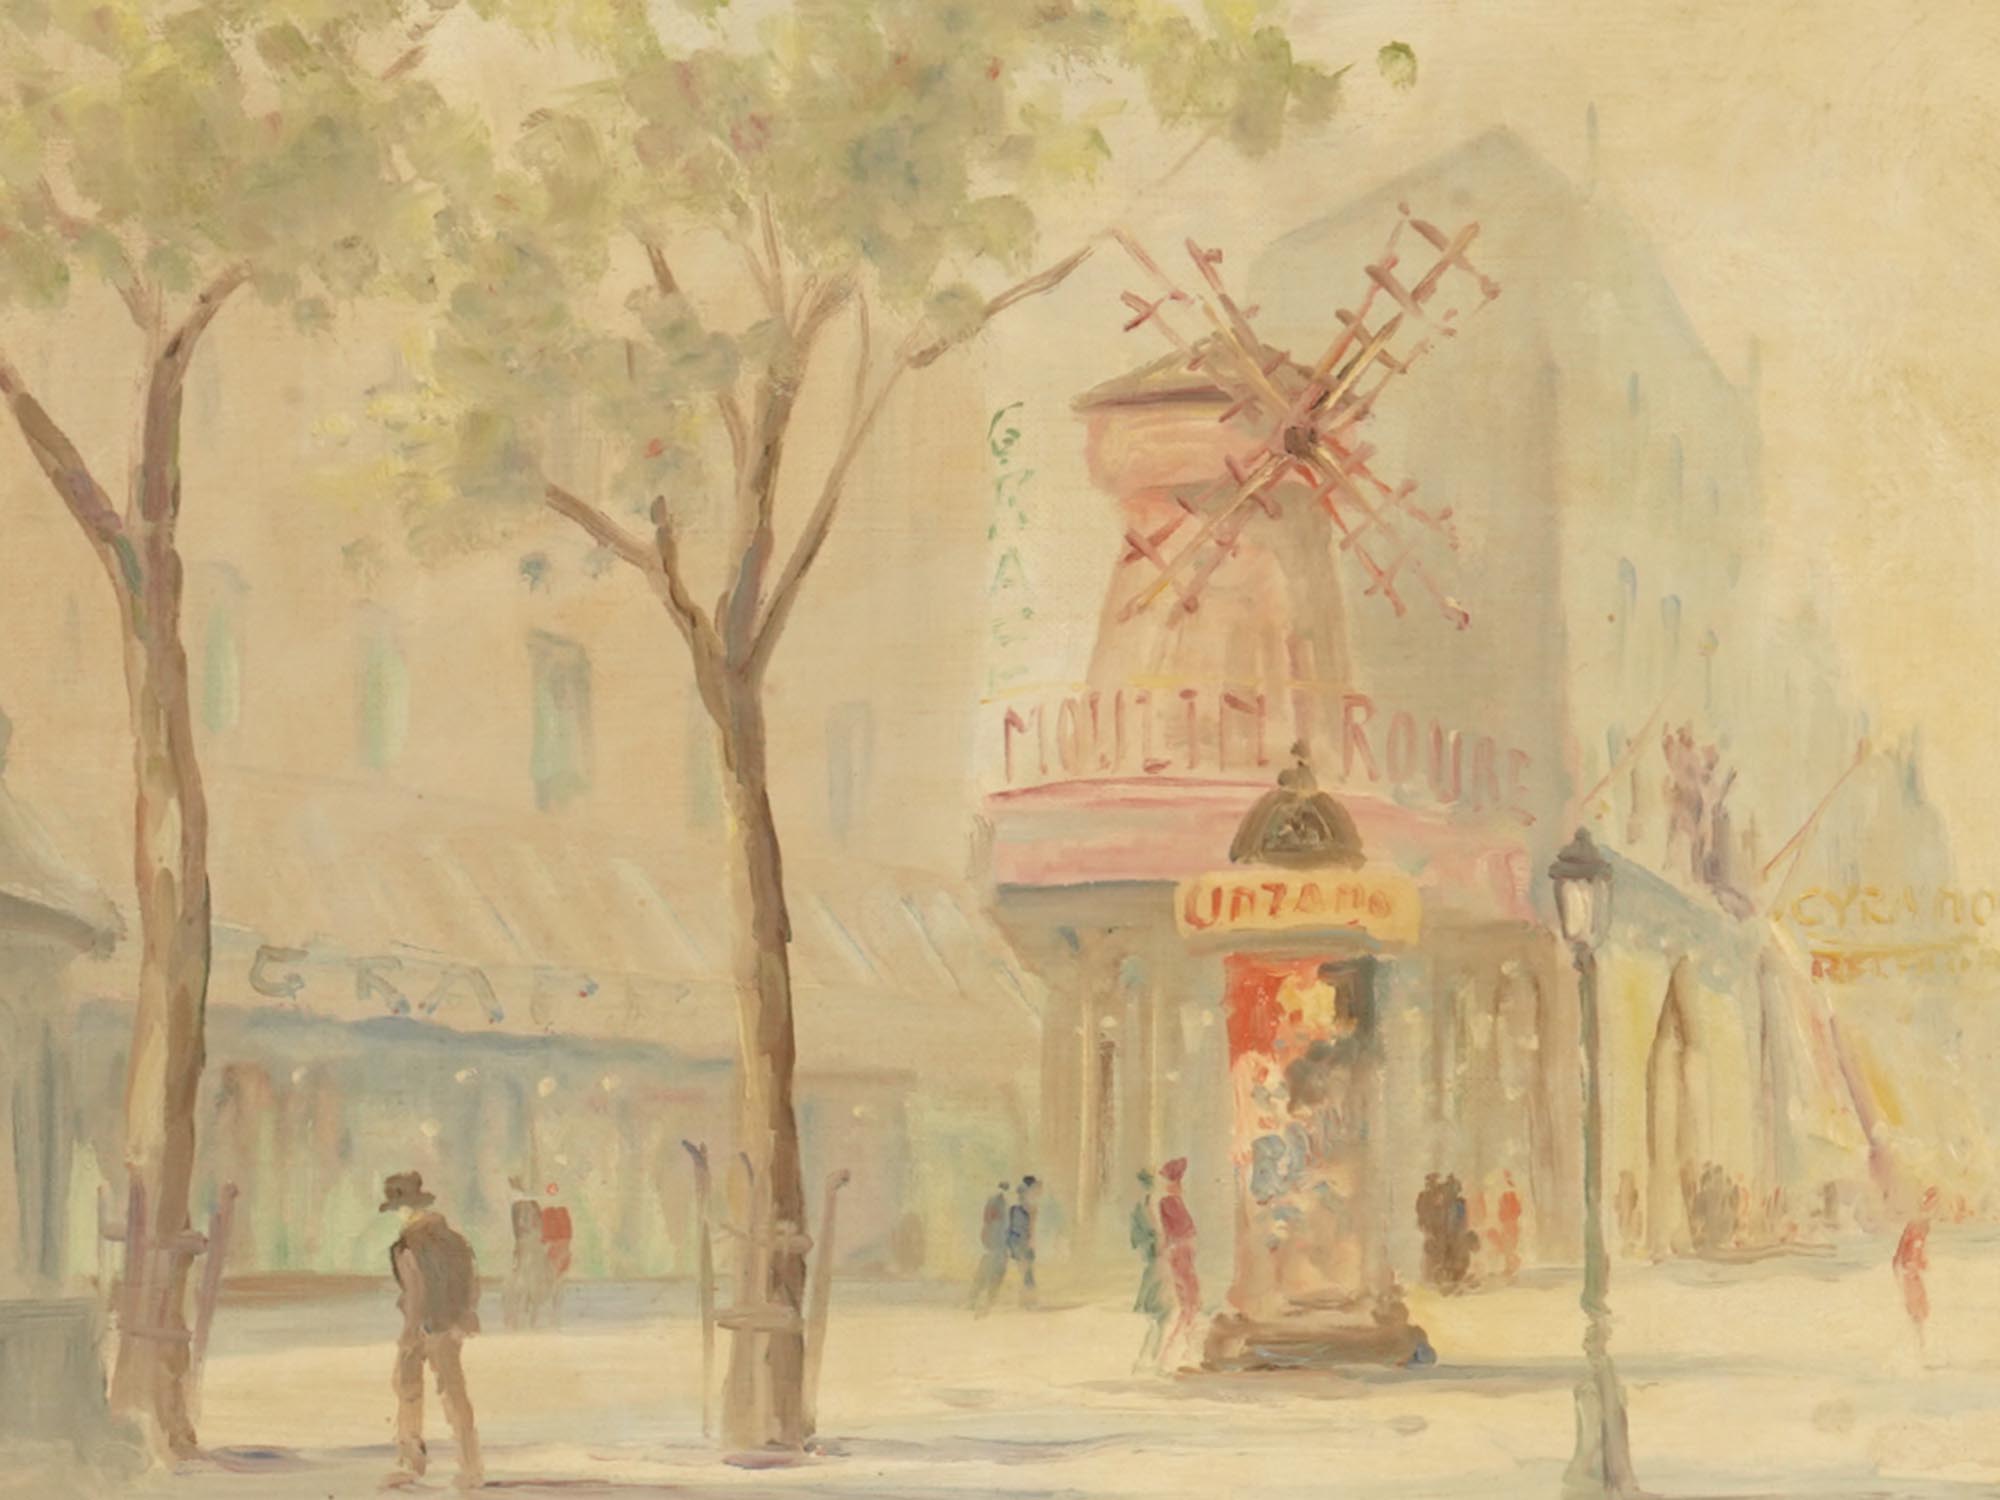 MOULIN ROUGE PARIS OIL PAINTING SIGNED BY L BARRE PIC-1